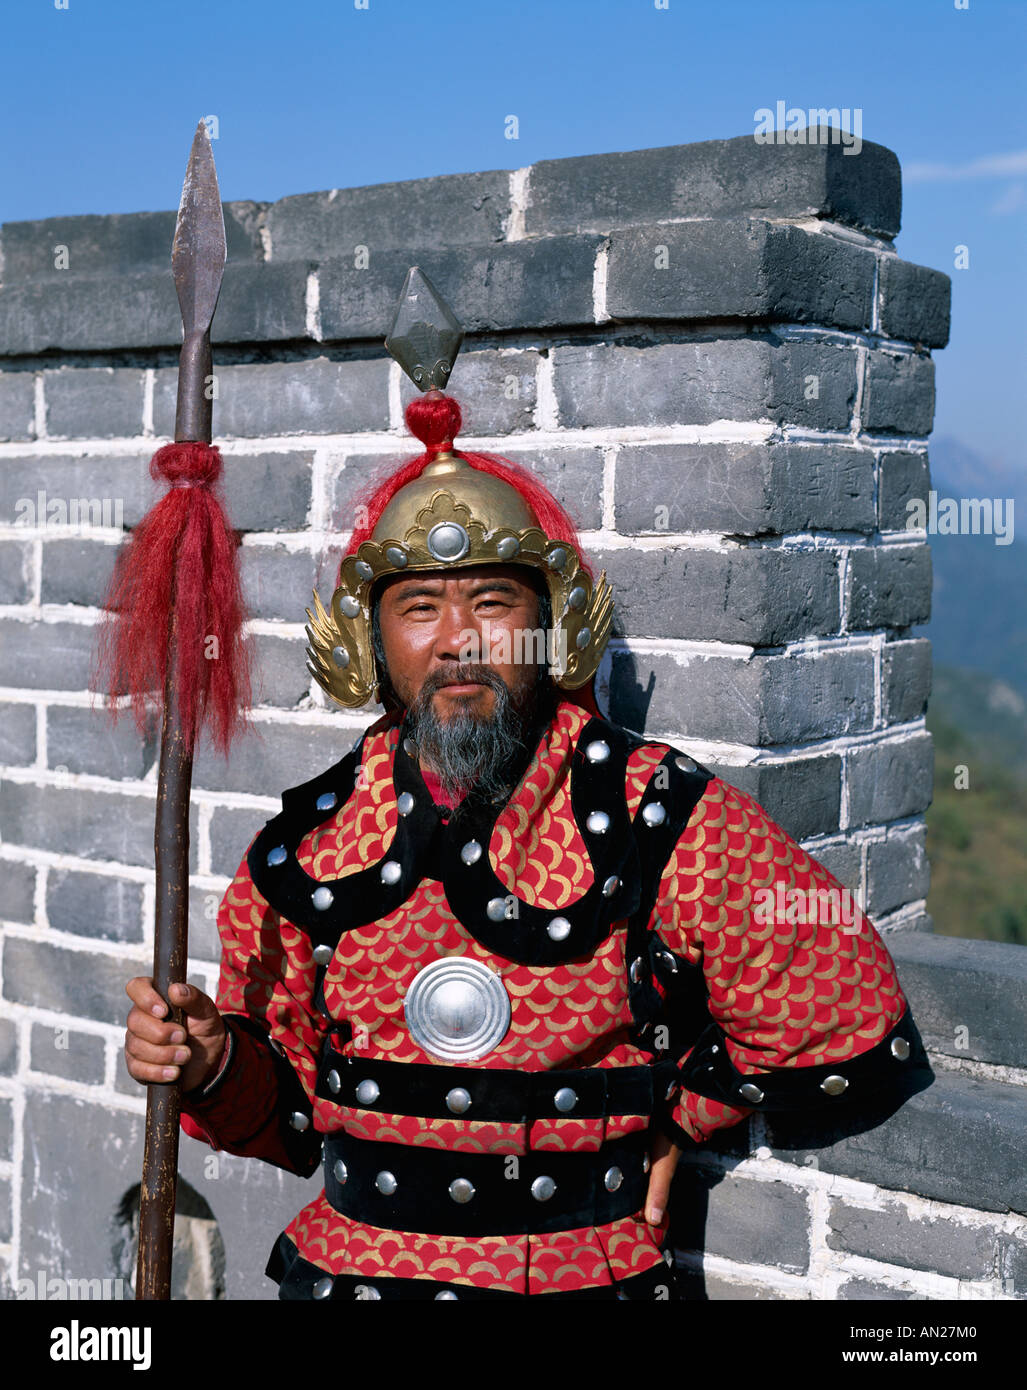 Great Wall at Mutianyu / Man Dressed in Ming Dynasty Costume, Beijing, China  Stock Photo - Alamy